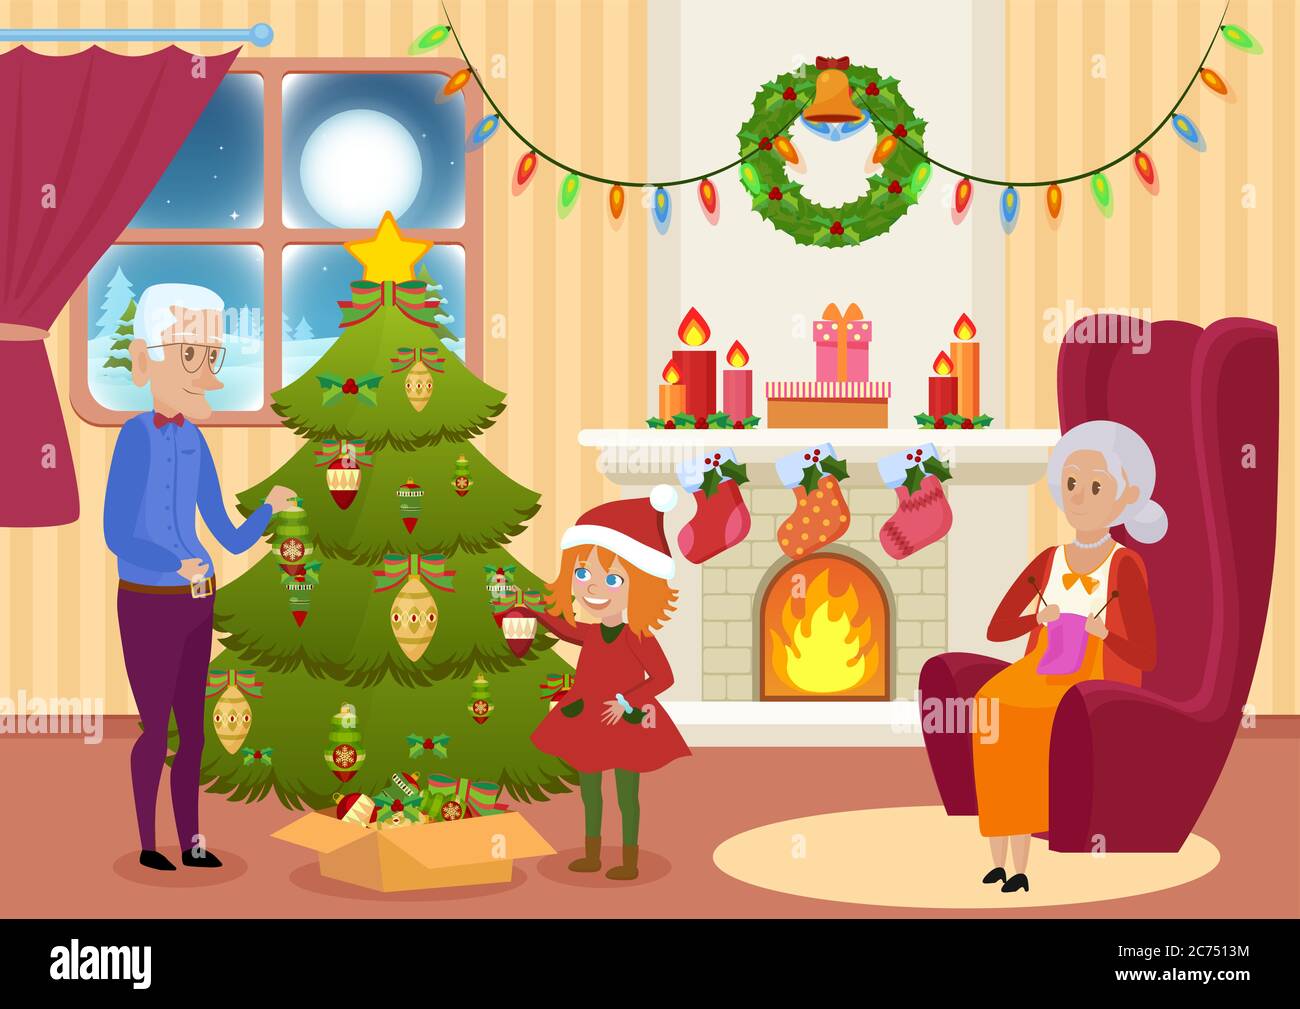 Vector illustration of granddaughter and grandfather decorating Christmas tree while grandmother knitting. Stock Vector